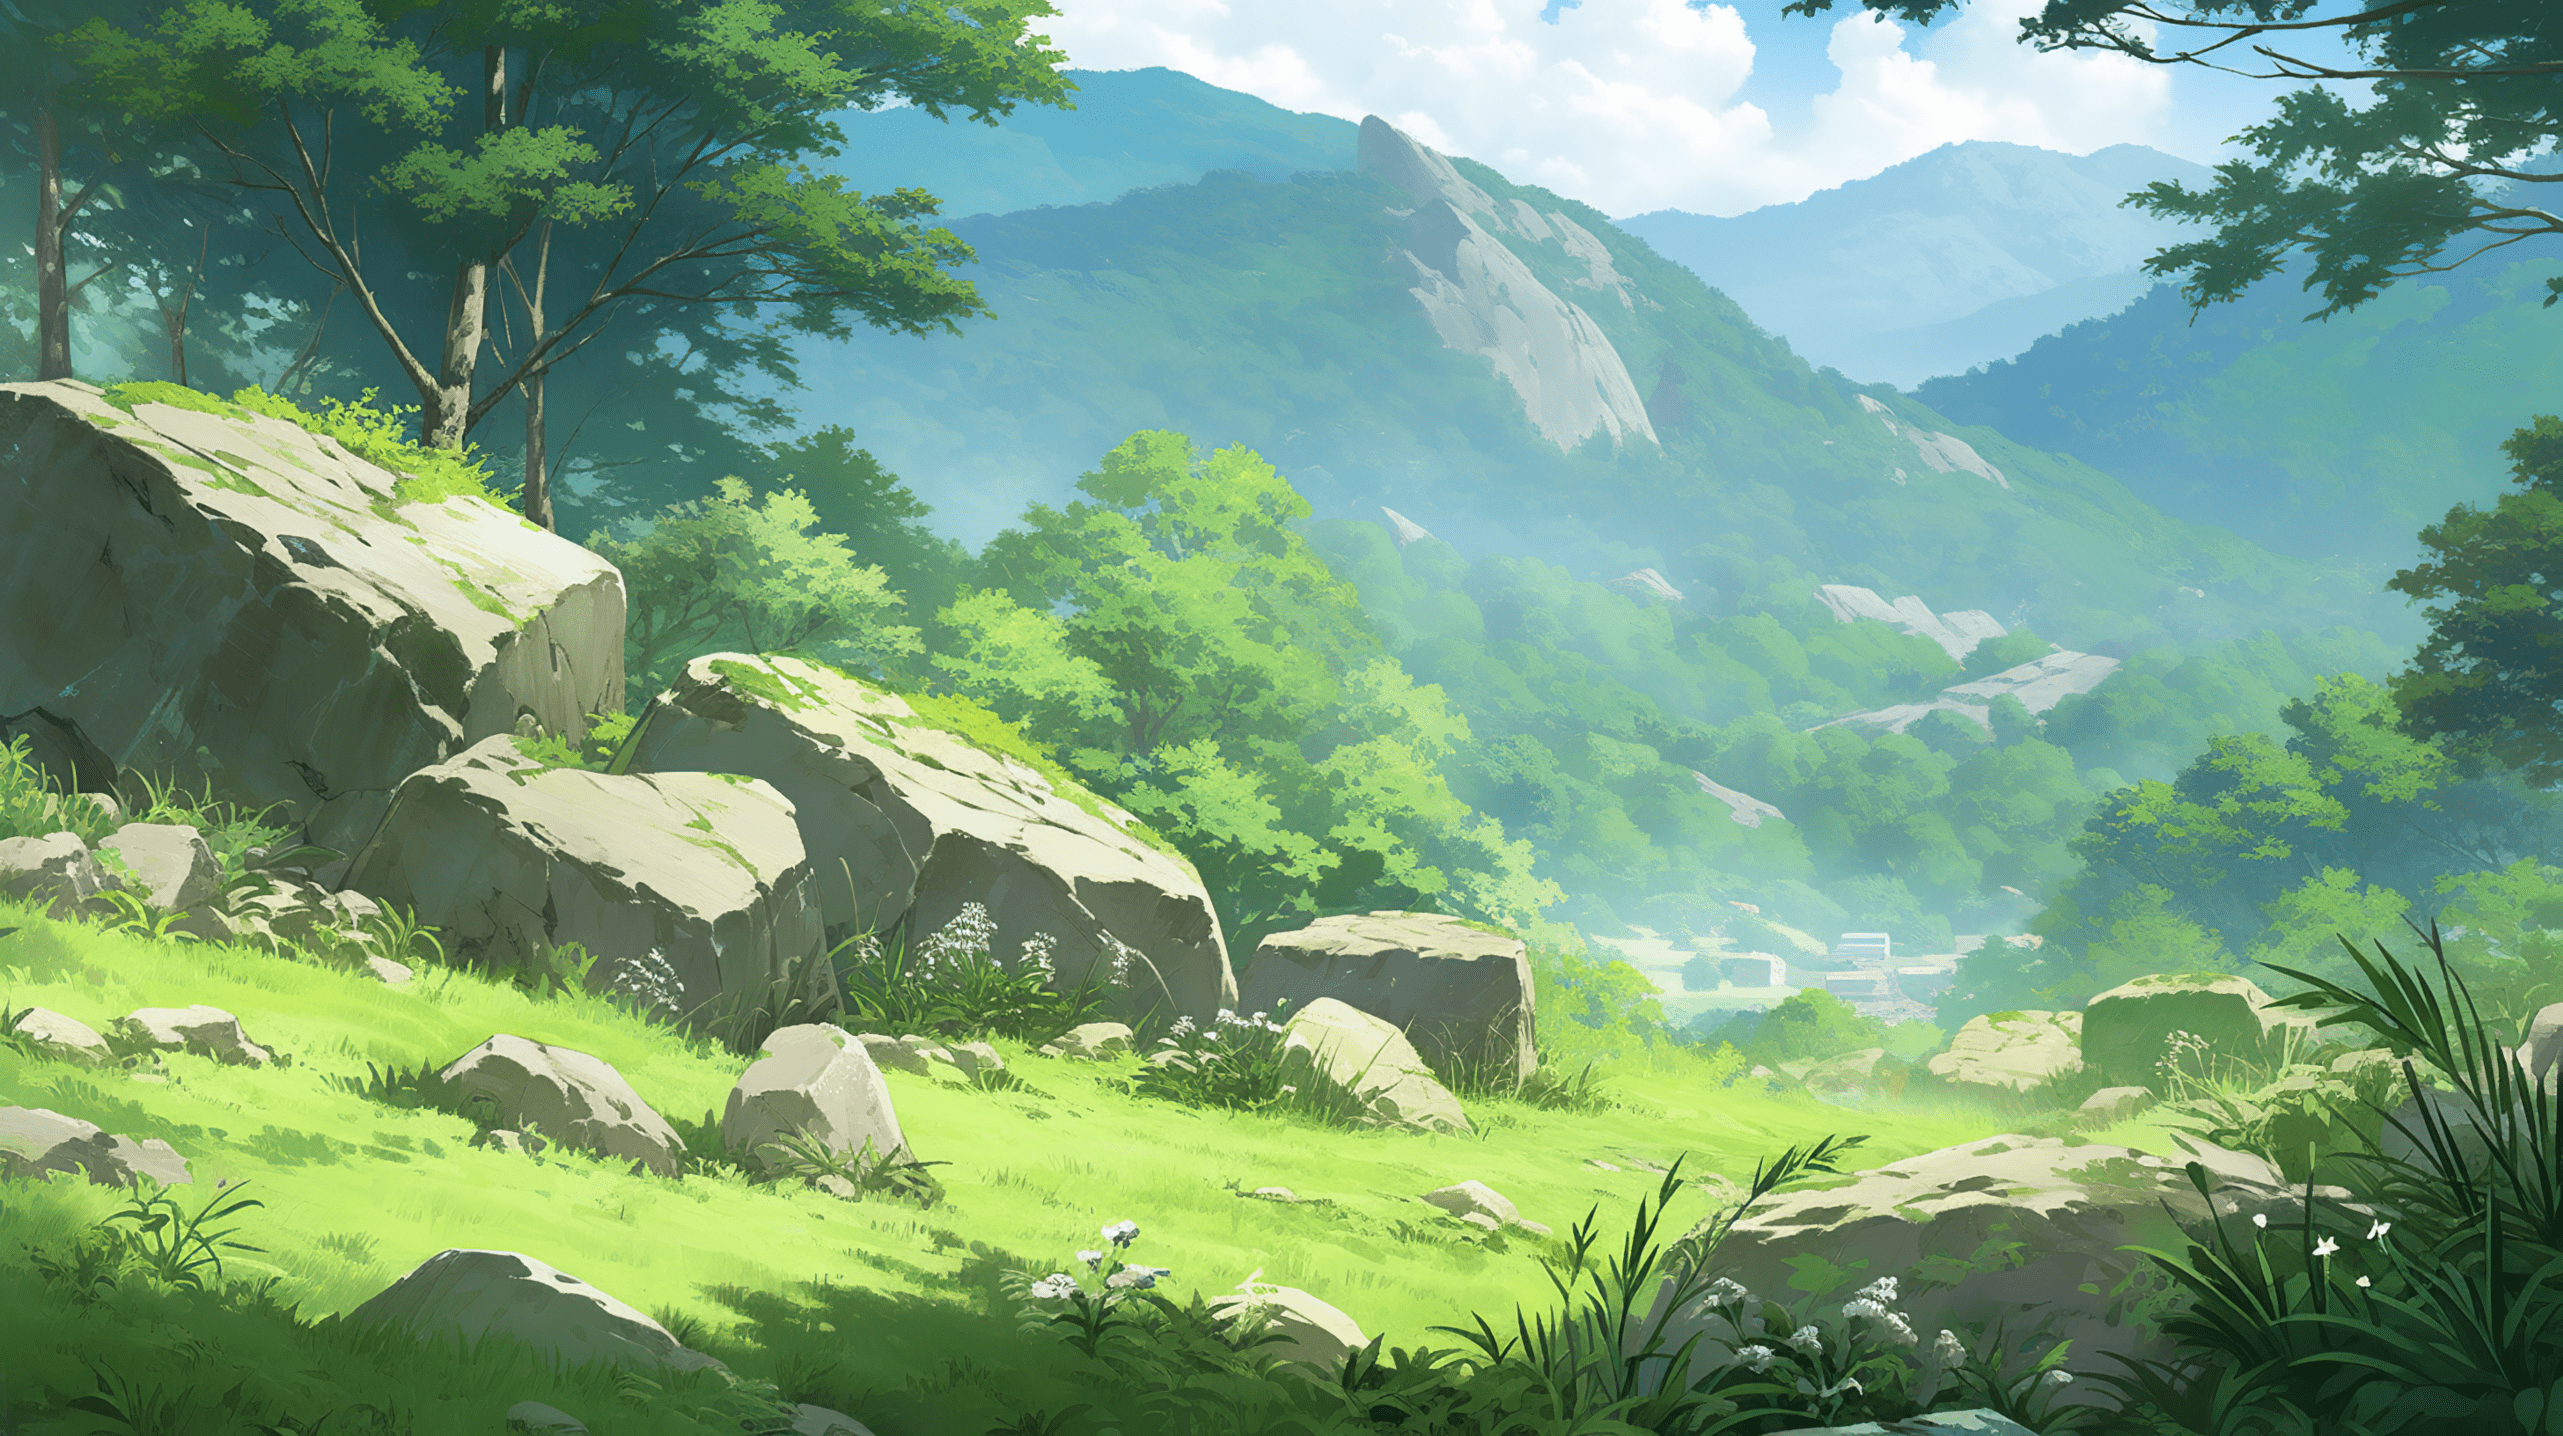 A digital painting of a grassy hillside with large rocks and trees. - Landscape, anime, Windows 10, anime landscape, HD